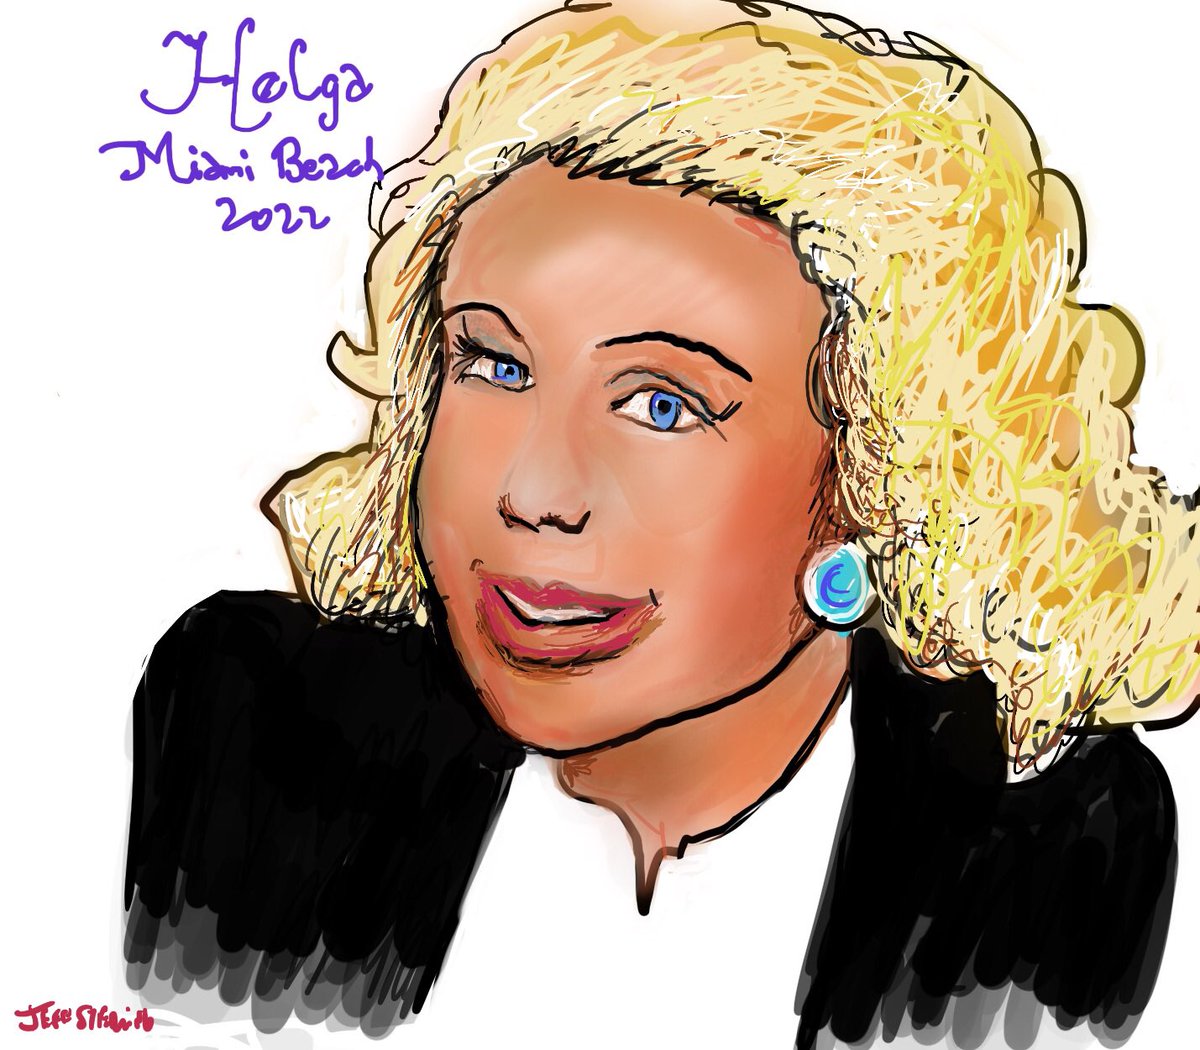 Helga from #Germany attended a #LatinFoodFestival in #MiamiBeach during her #FloridaVacation. Event Planers also booked #Caricature entertainment by #MiamiCaricatureArtist Jeff Sterling from FloridaCaricatures.Com